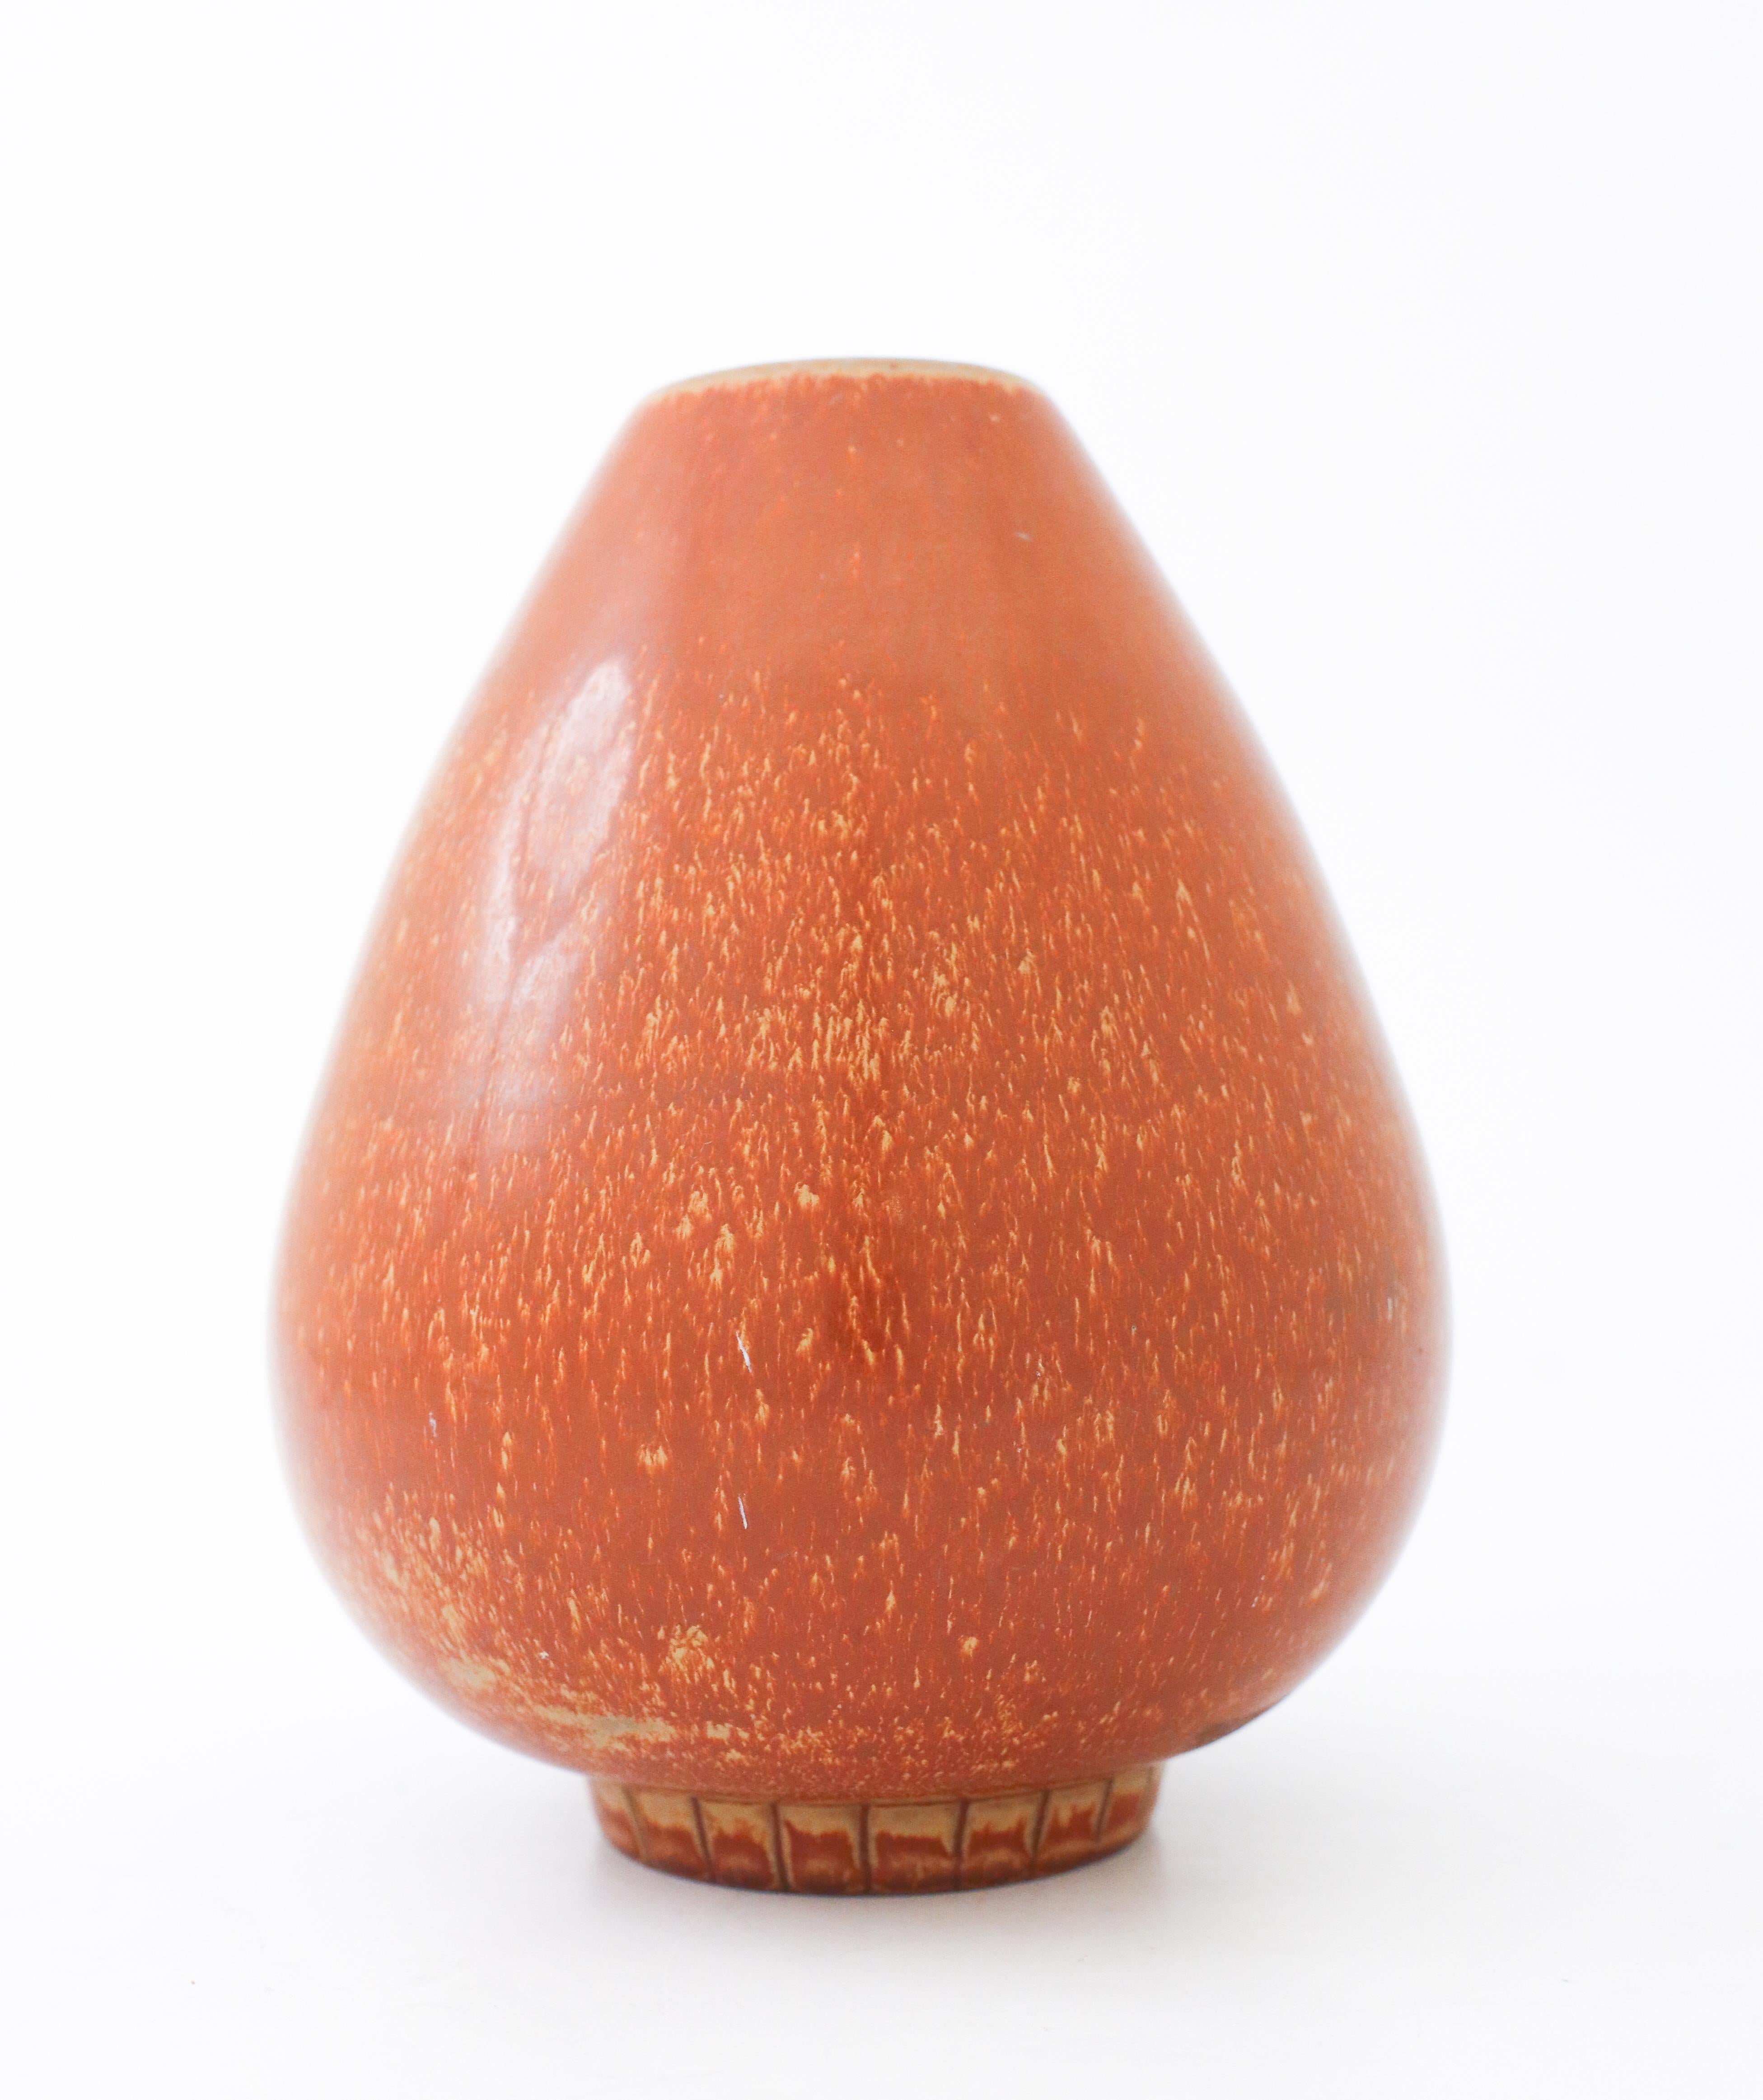 A lovely brown vase designed by Gunnar Nylund at Rörstrand in the 1950s. The vase is 17.5 cm high and in mint condition.